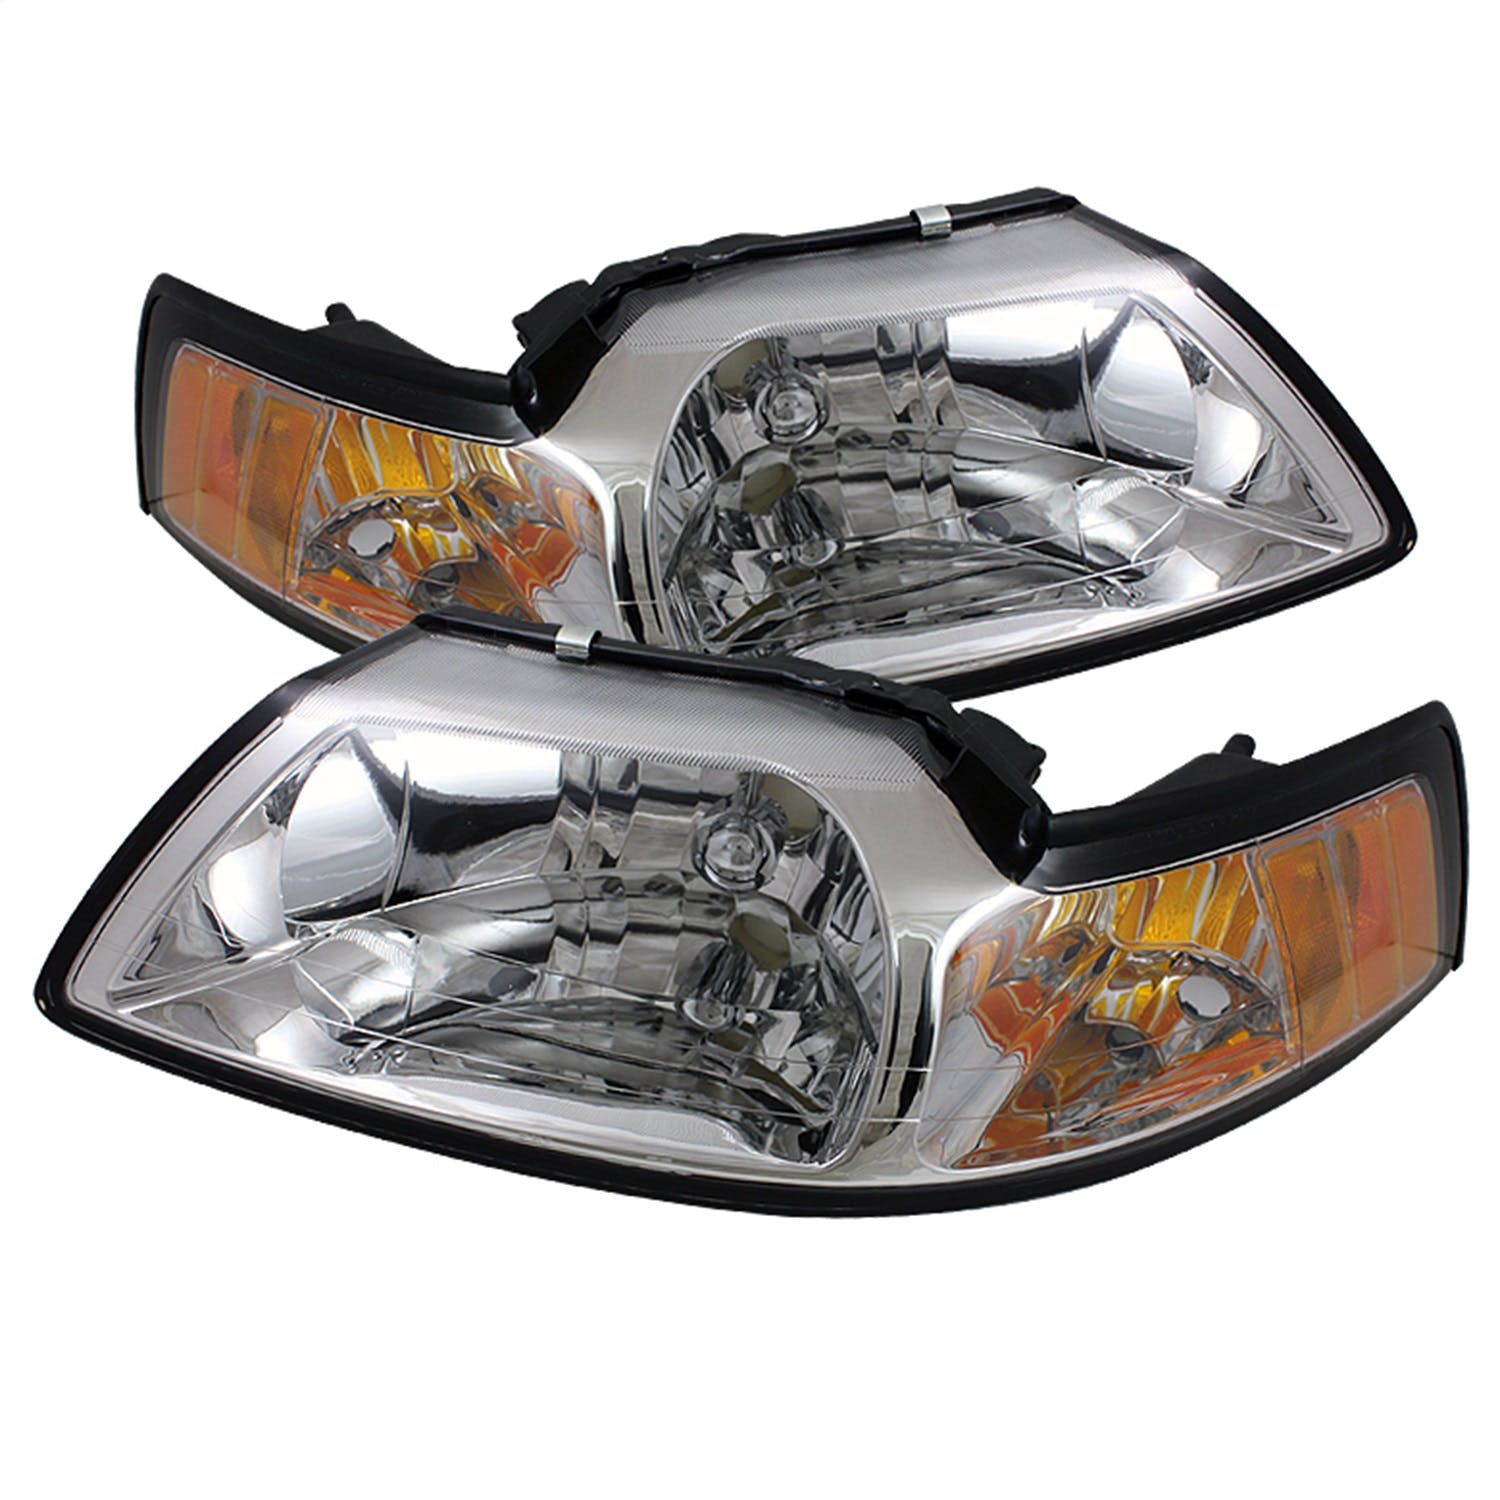 XTUNE POWER 5064493 Ford Mustang 99 04 Amber Crystal Headlights Chrome